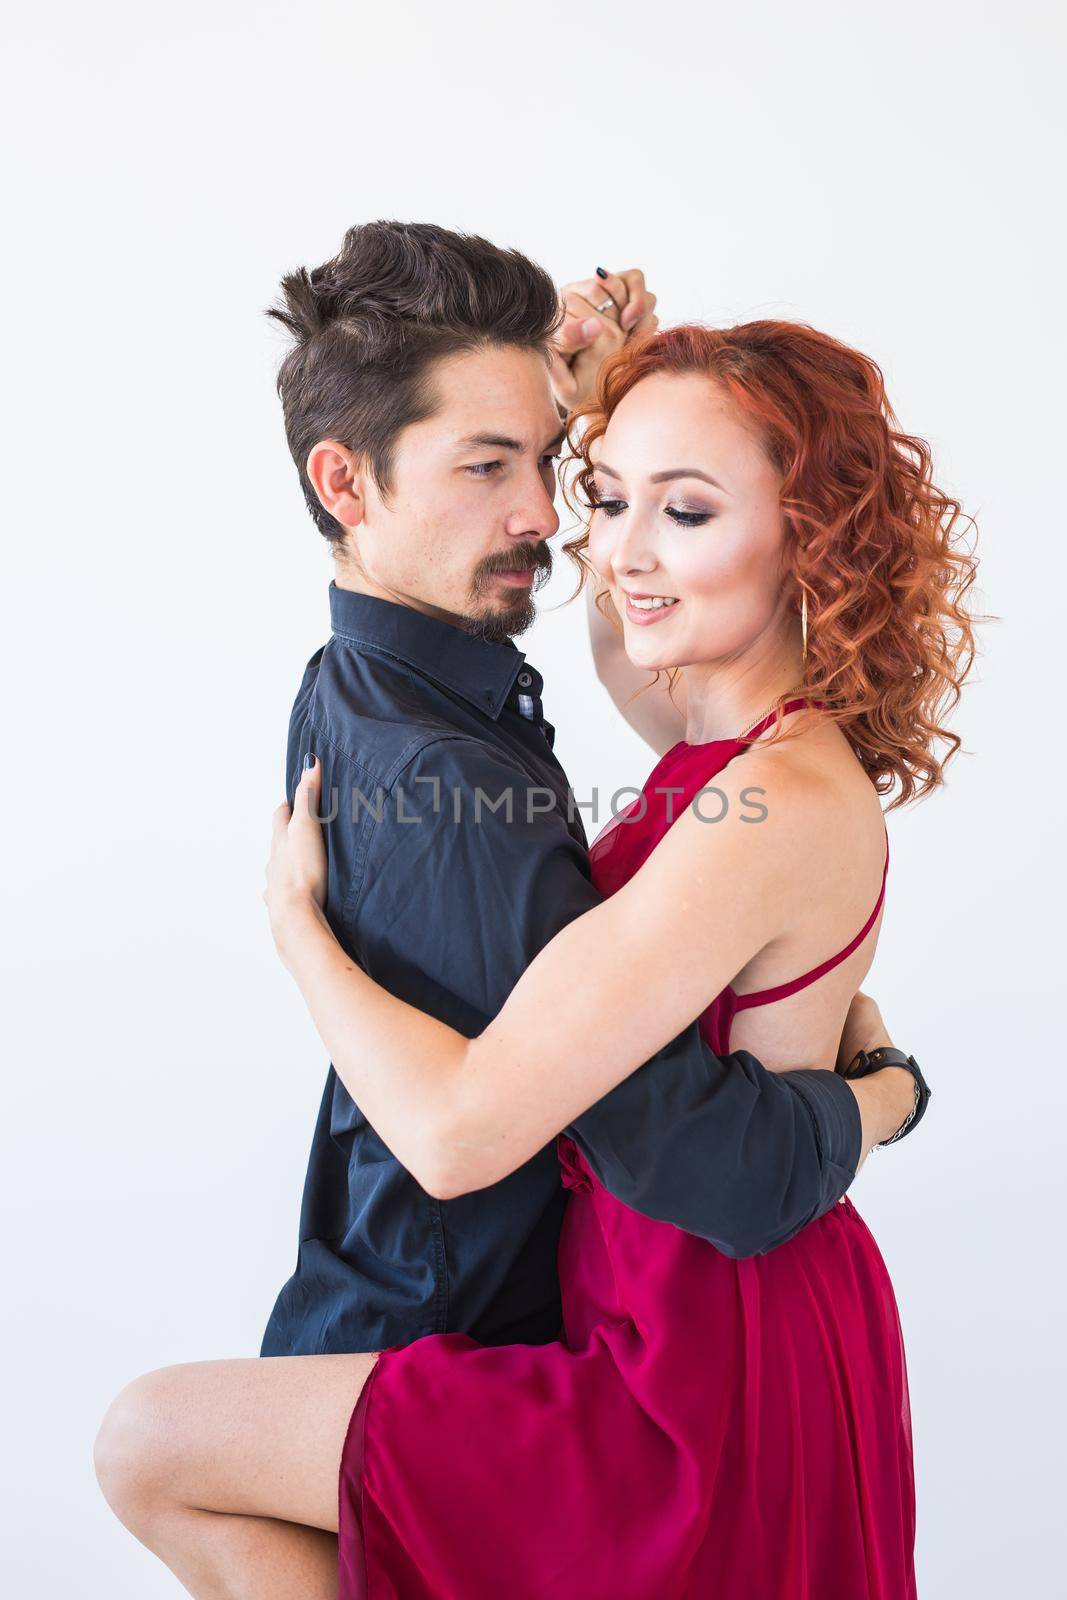 Social dance, bachata, kizomba, salsa, tango concept - Close up portrait of woman man dressed in beautiful outfits over white background by Satura86